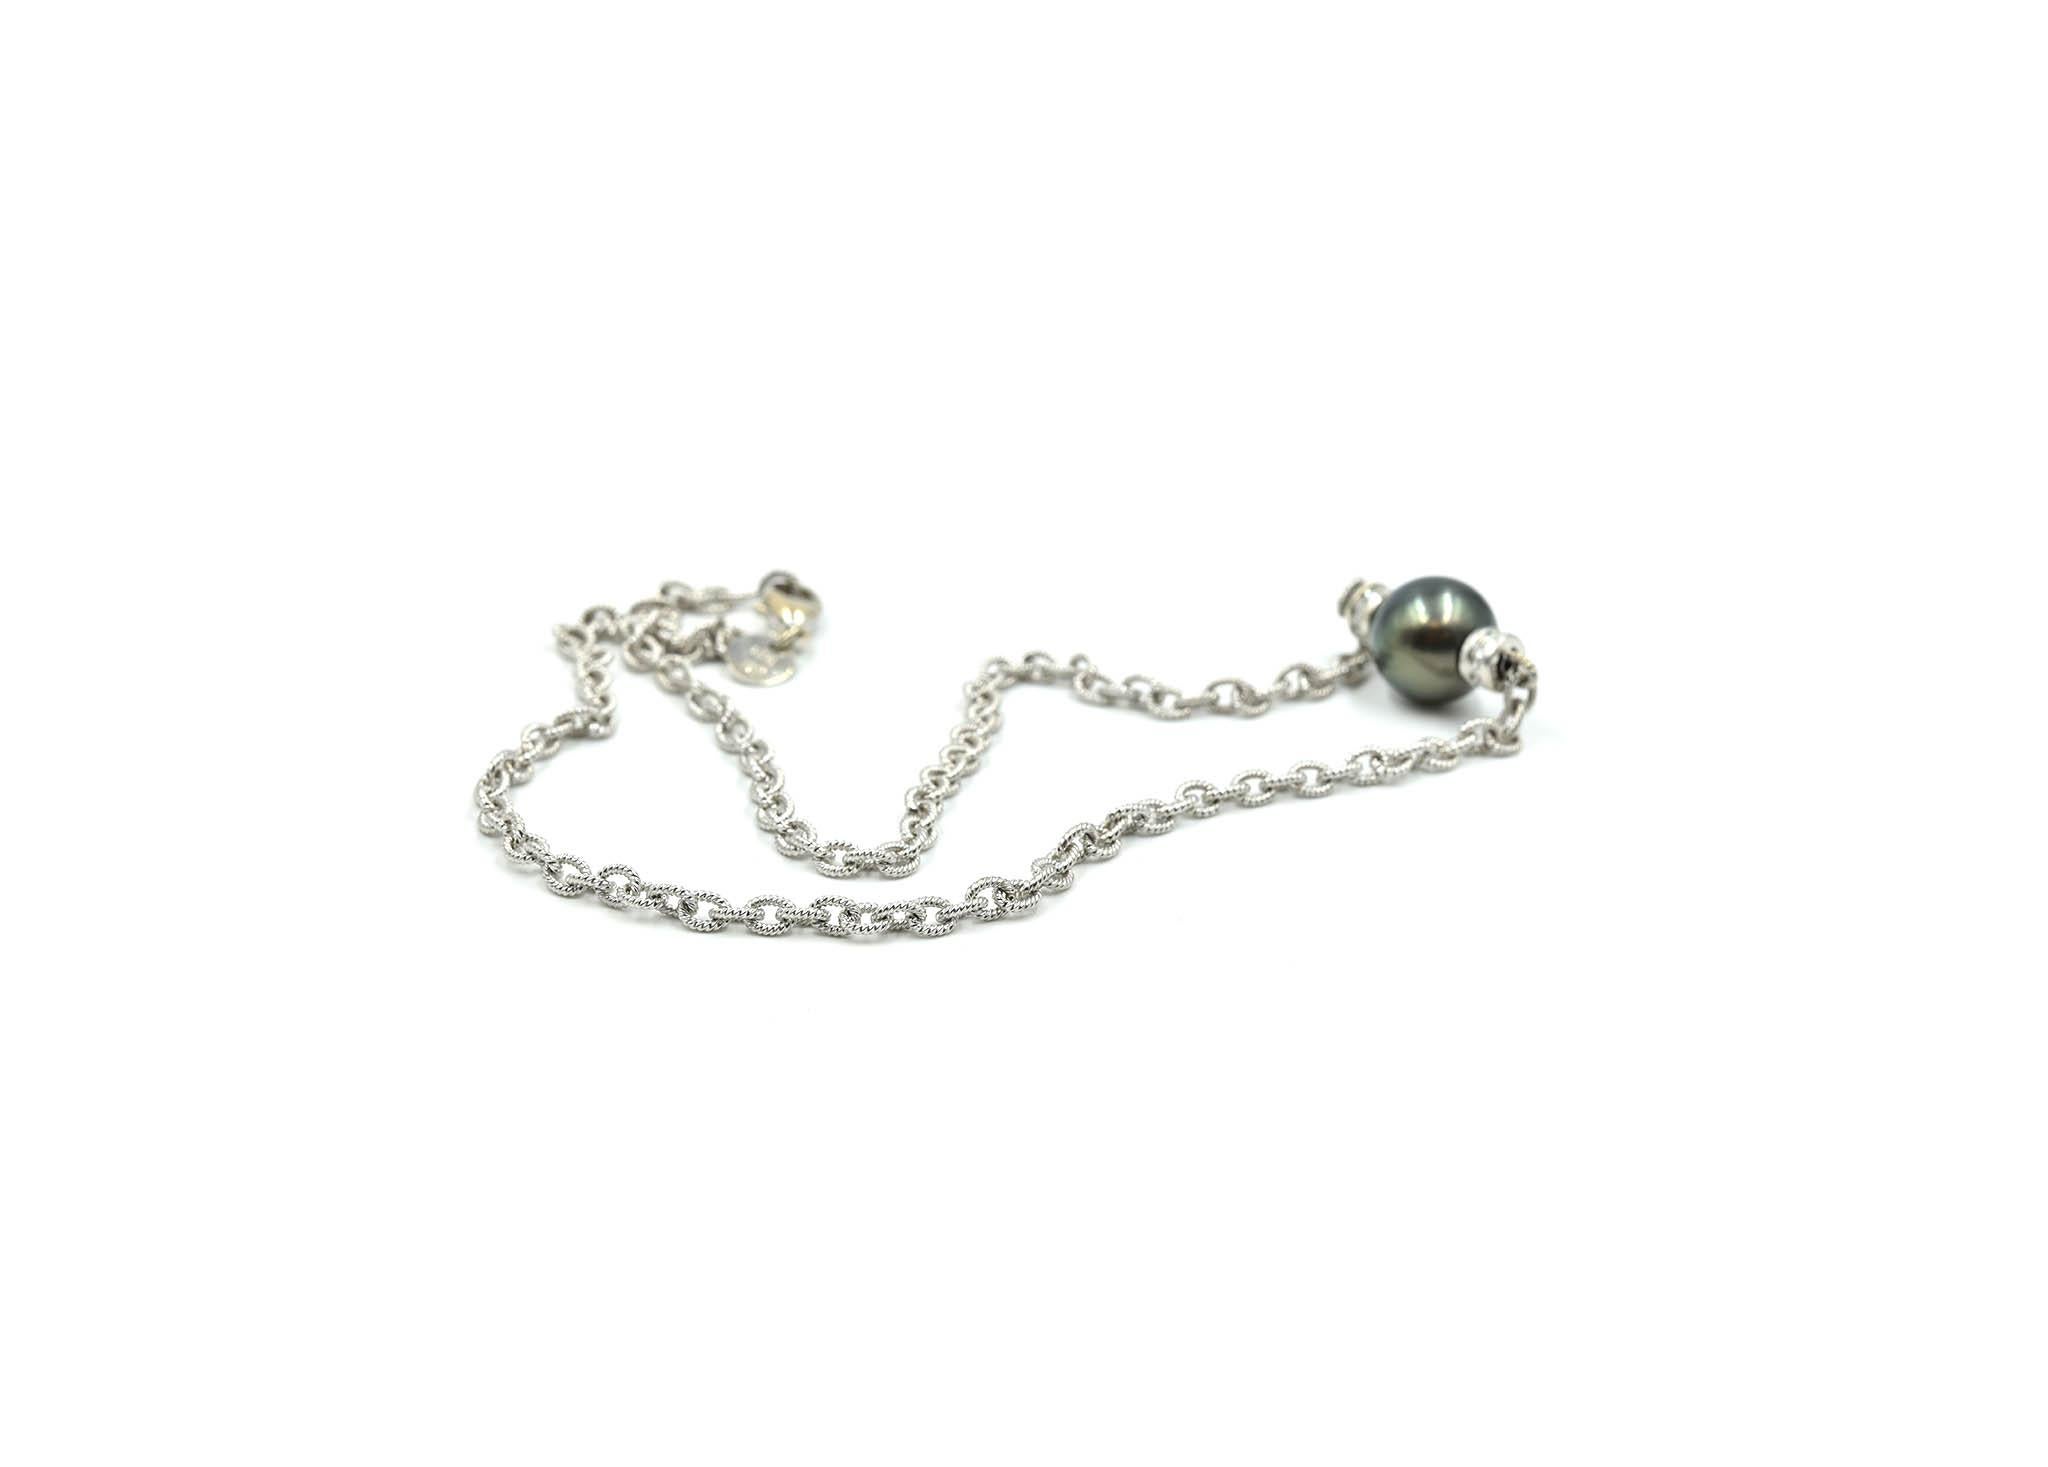 18 Karat White Gold, Tahitian Pearl and 0.18 Carat Diamond Necklace In Excellent Condition For Sale In Scottsdale, AZ